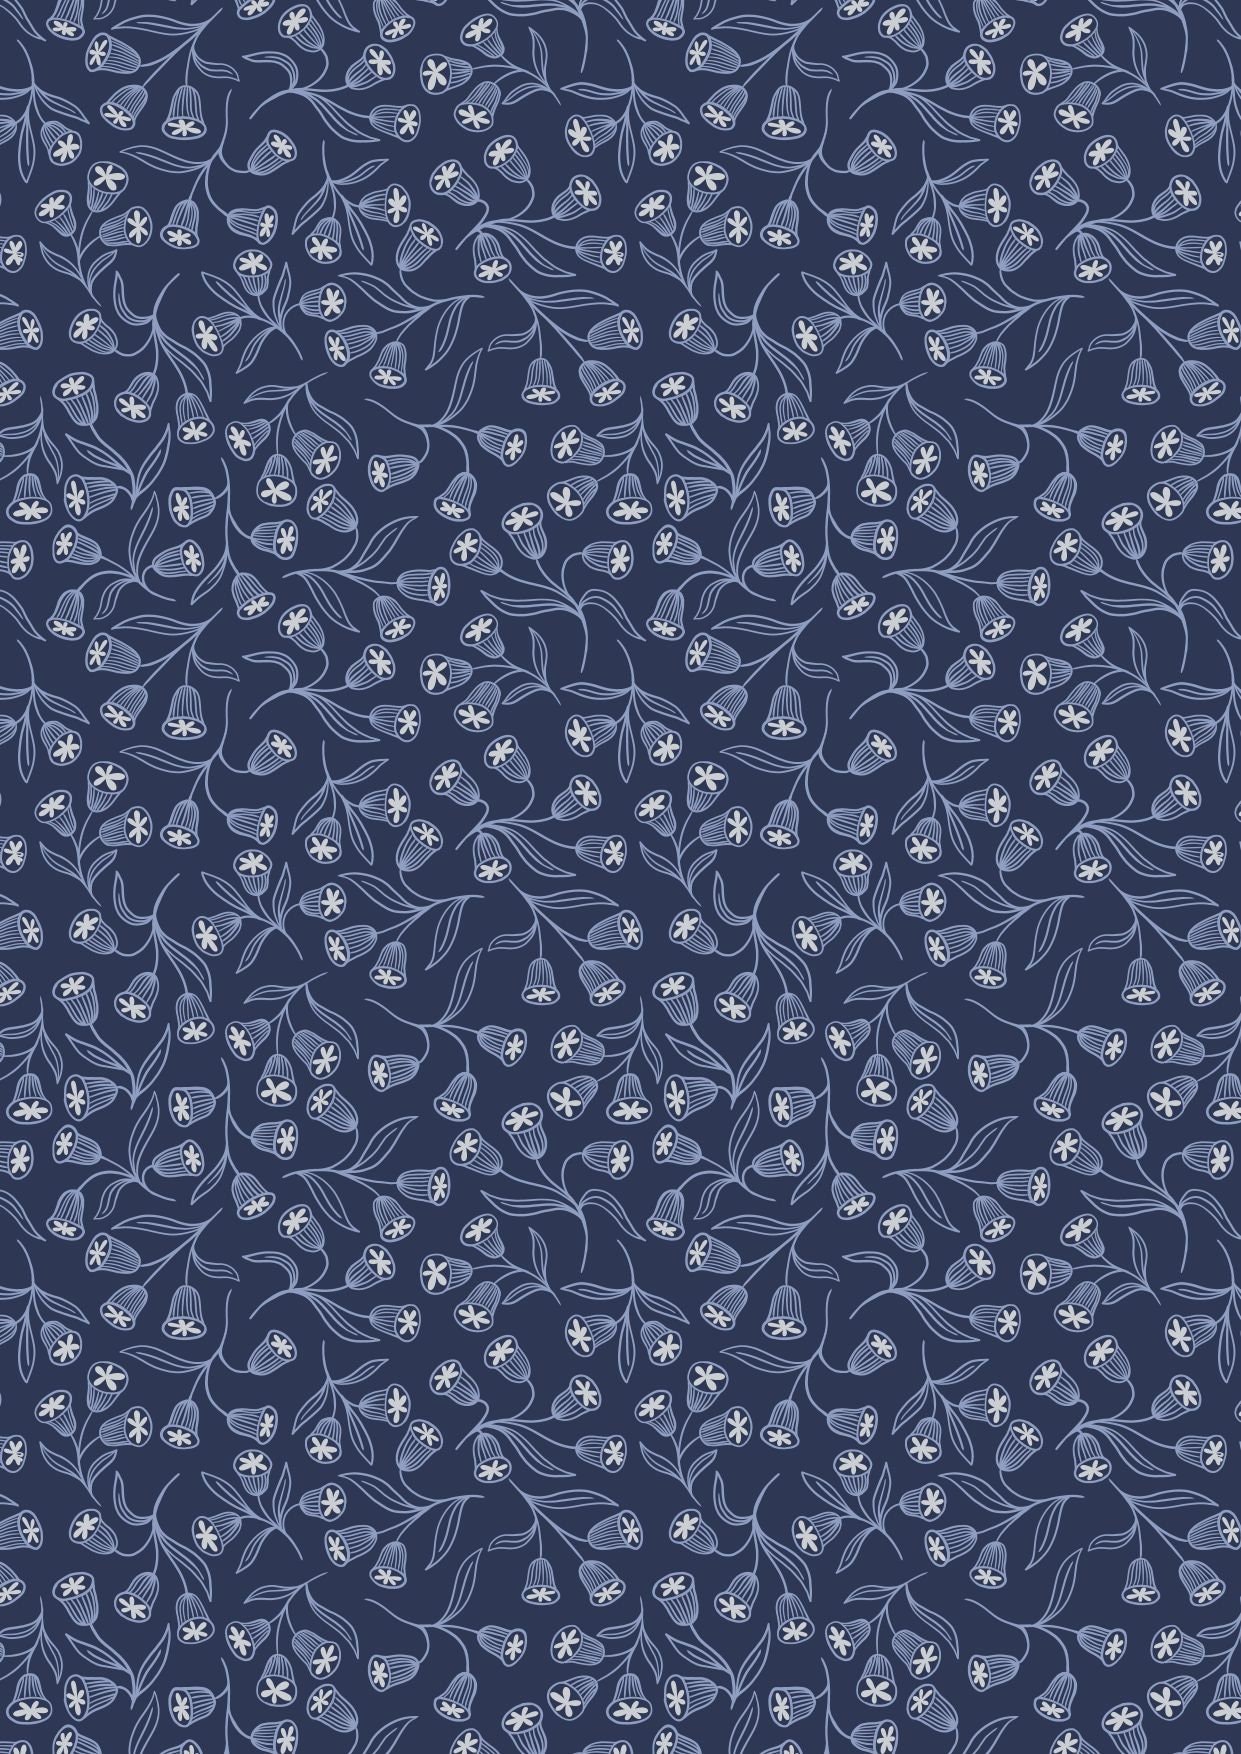 Lewis & Irene Enchanted Fabric Collection Enchanted Flowers on DK Blue with Silver Metallic QSQ100% Cotton